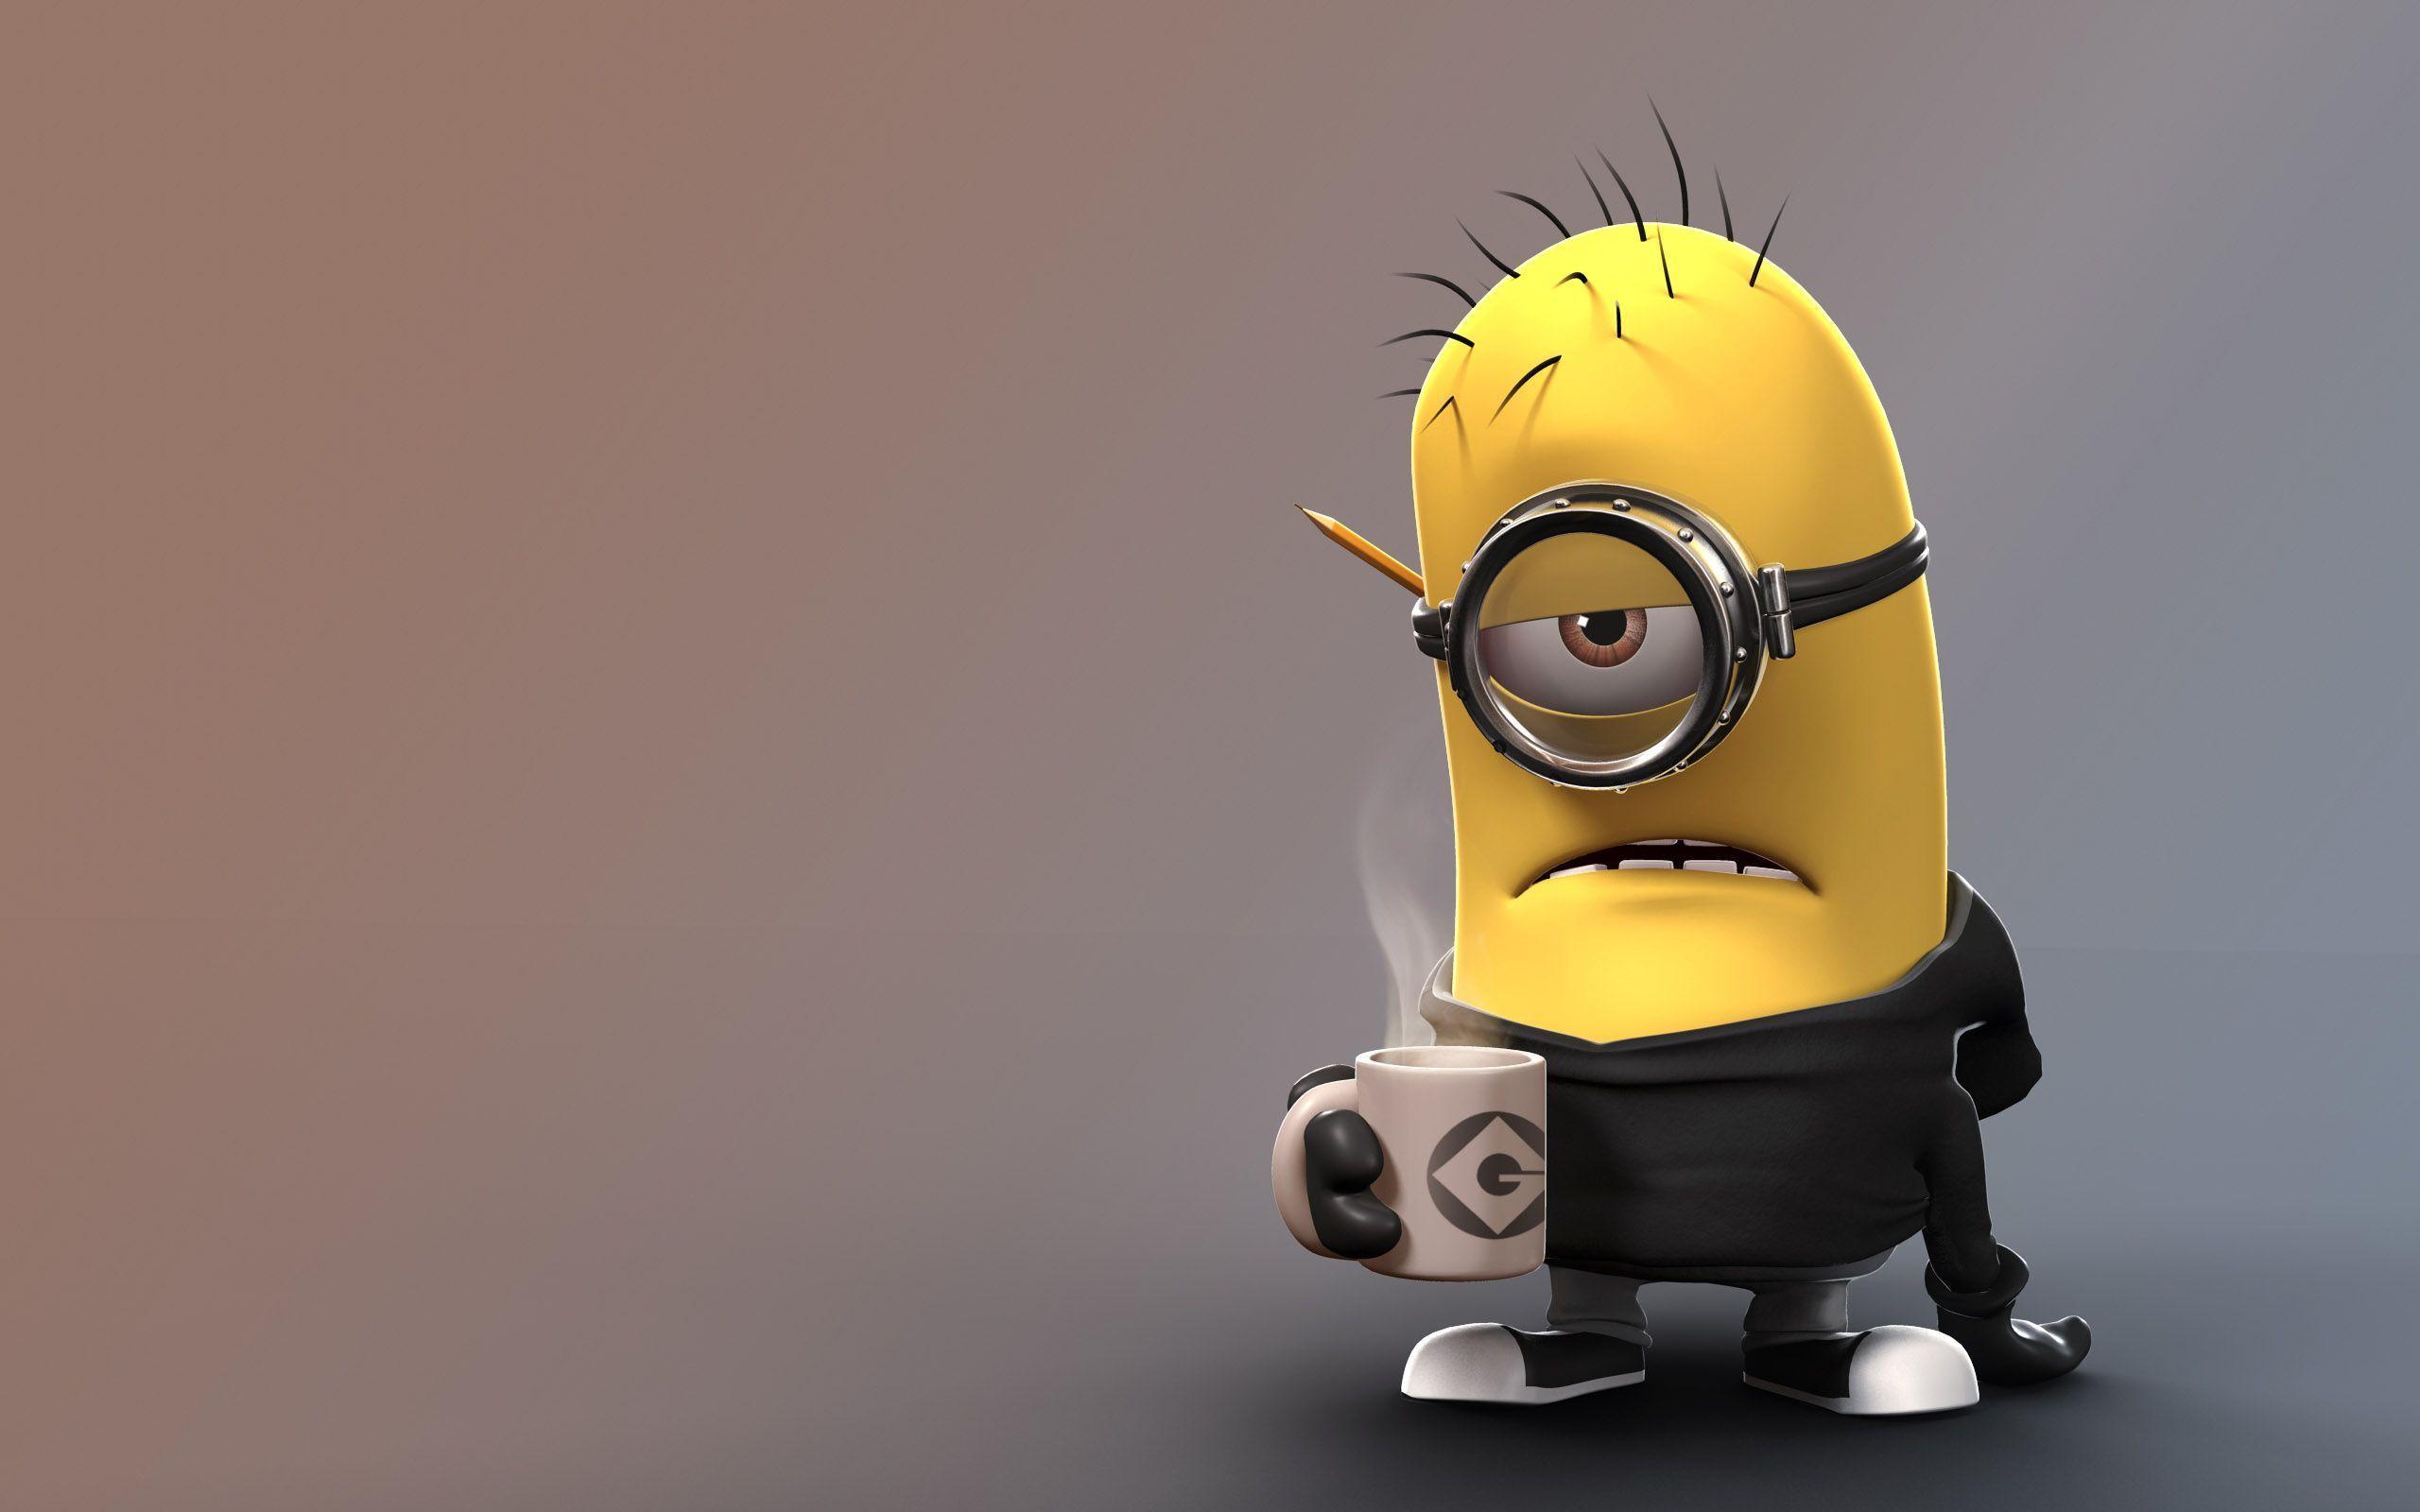 Despicable Me Minions Wallpapers - Wallpaper Cave